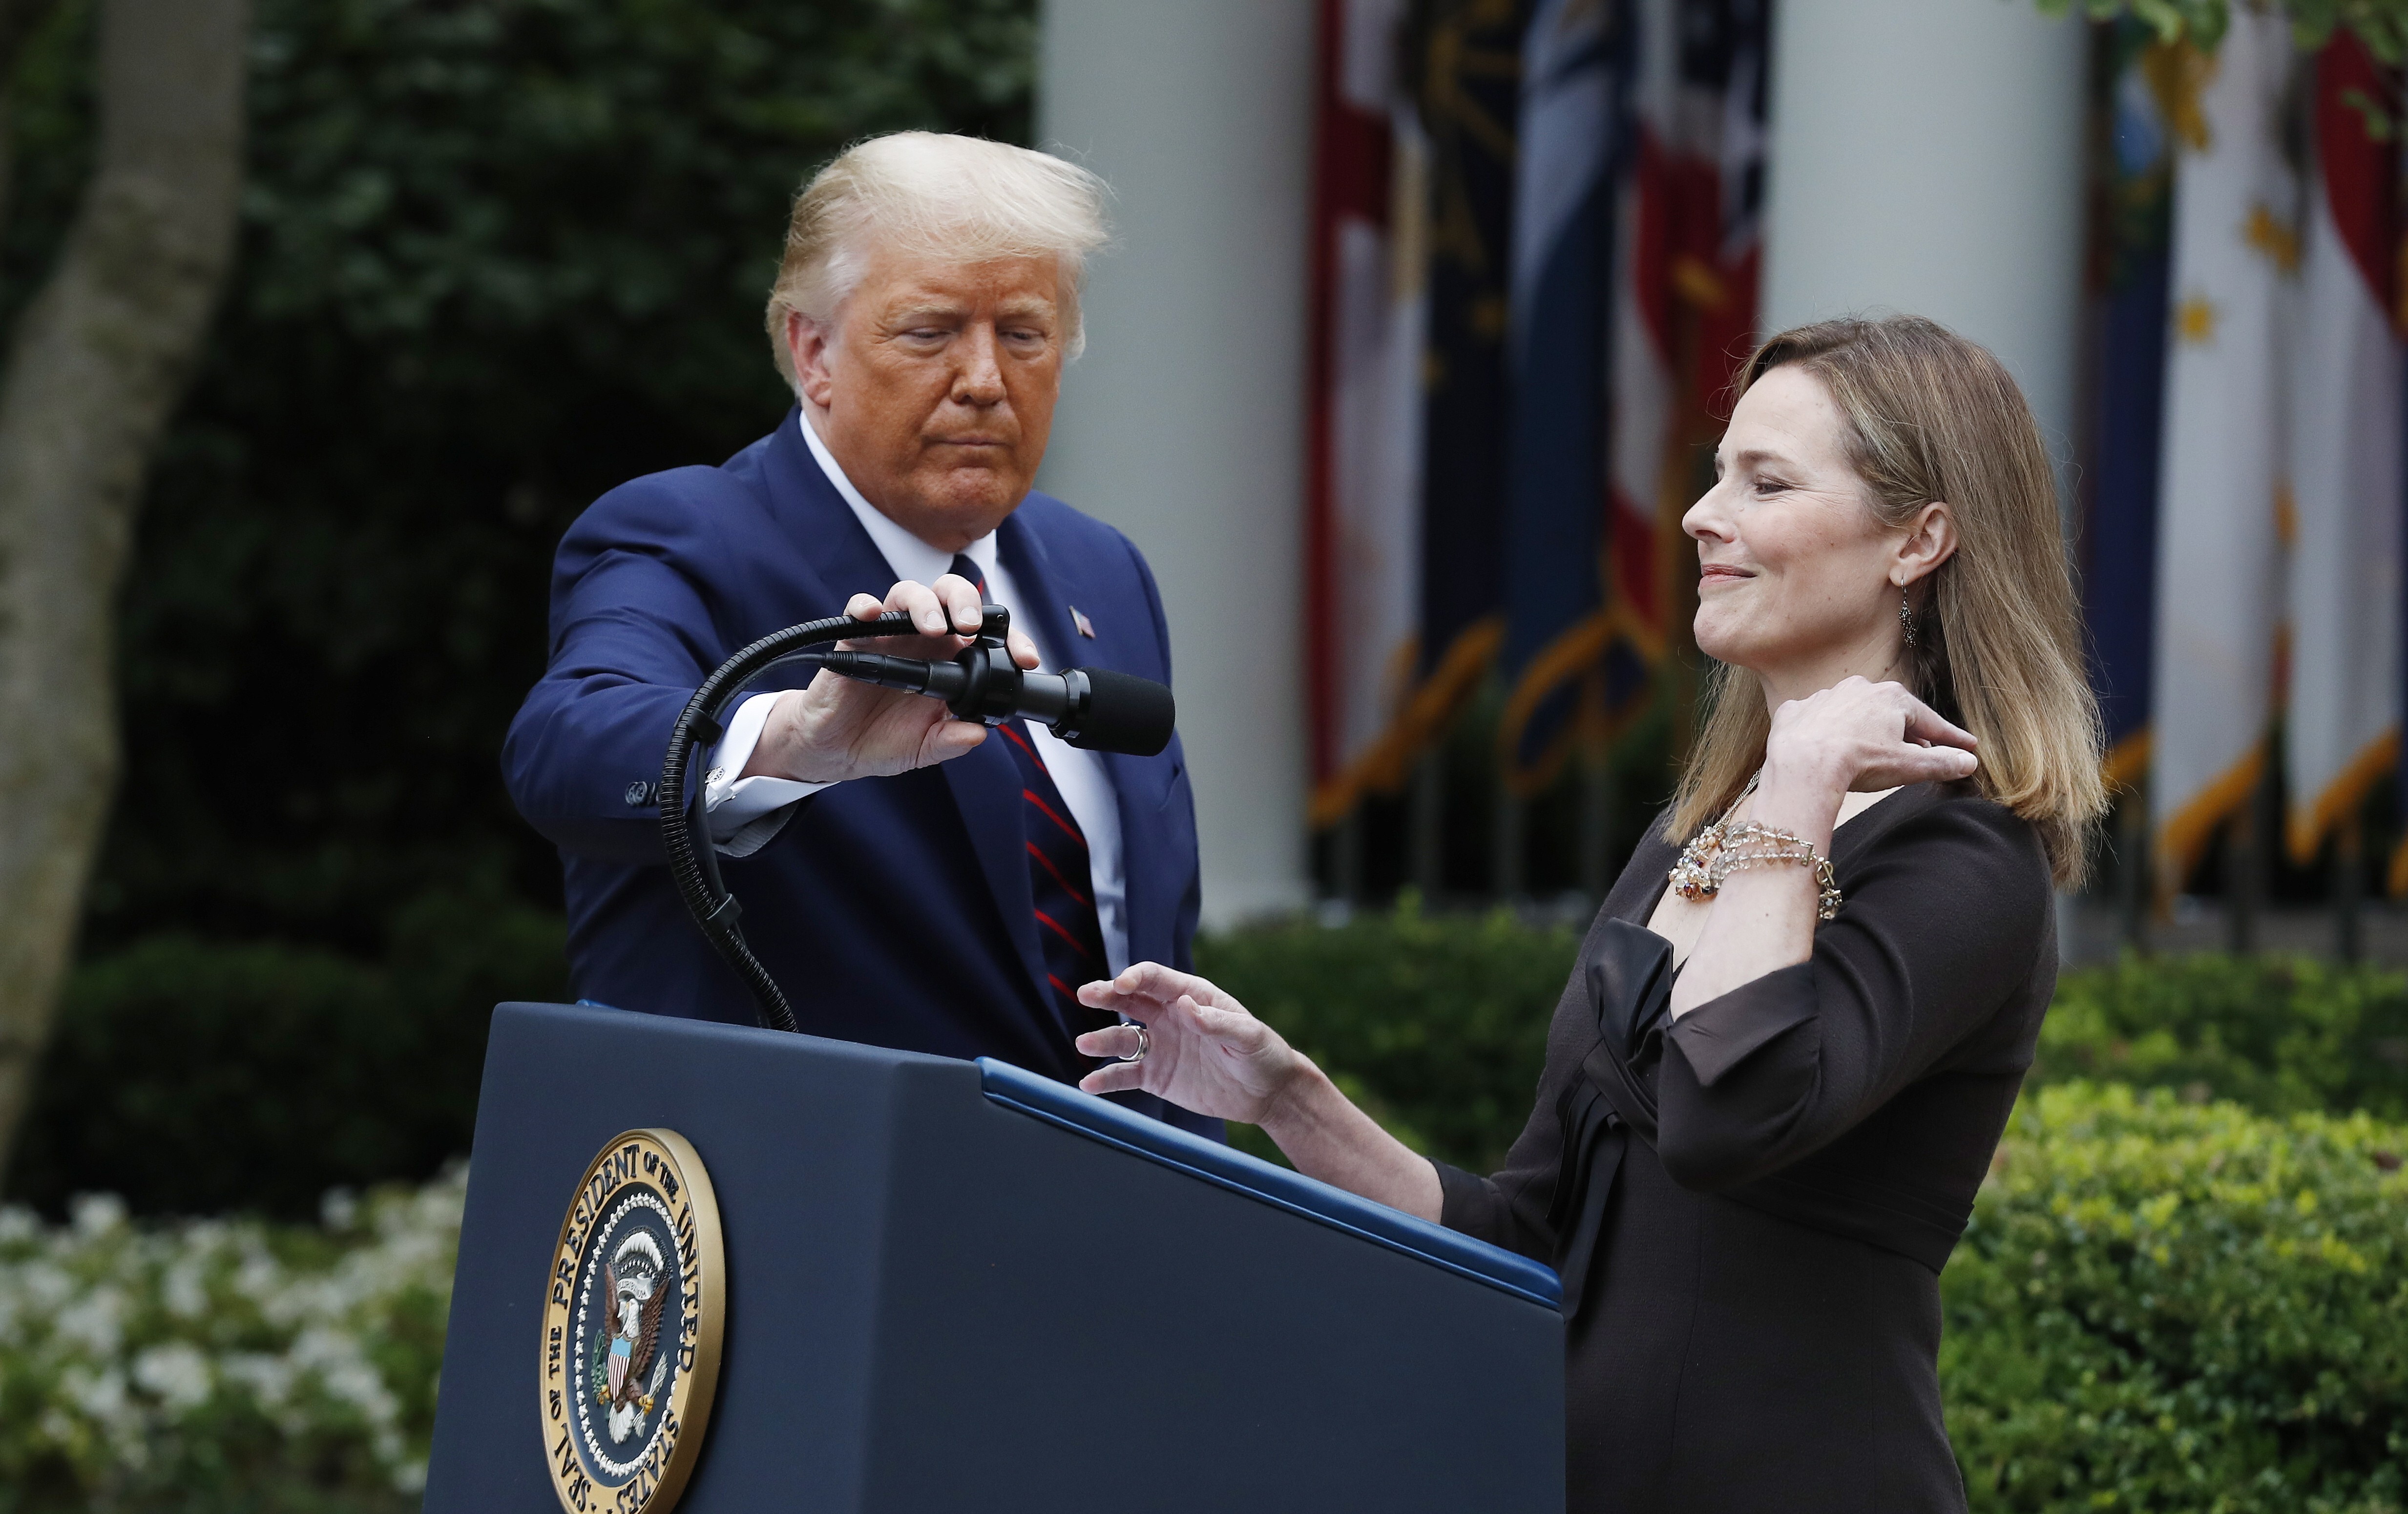 Judge Amy Coney Barrett speaks after being introduced by US President Donald Trump during a ceremony in the Rose Garden of the White House in September. Photo: EPA-EFE